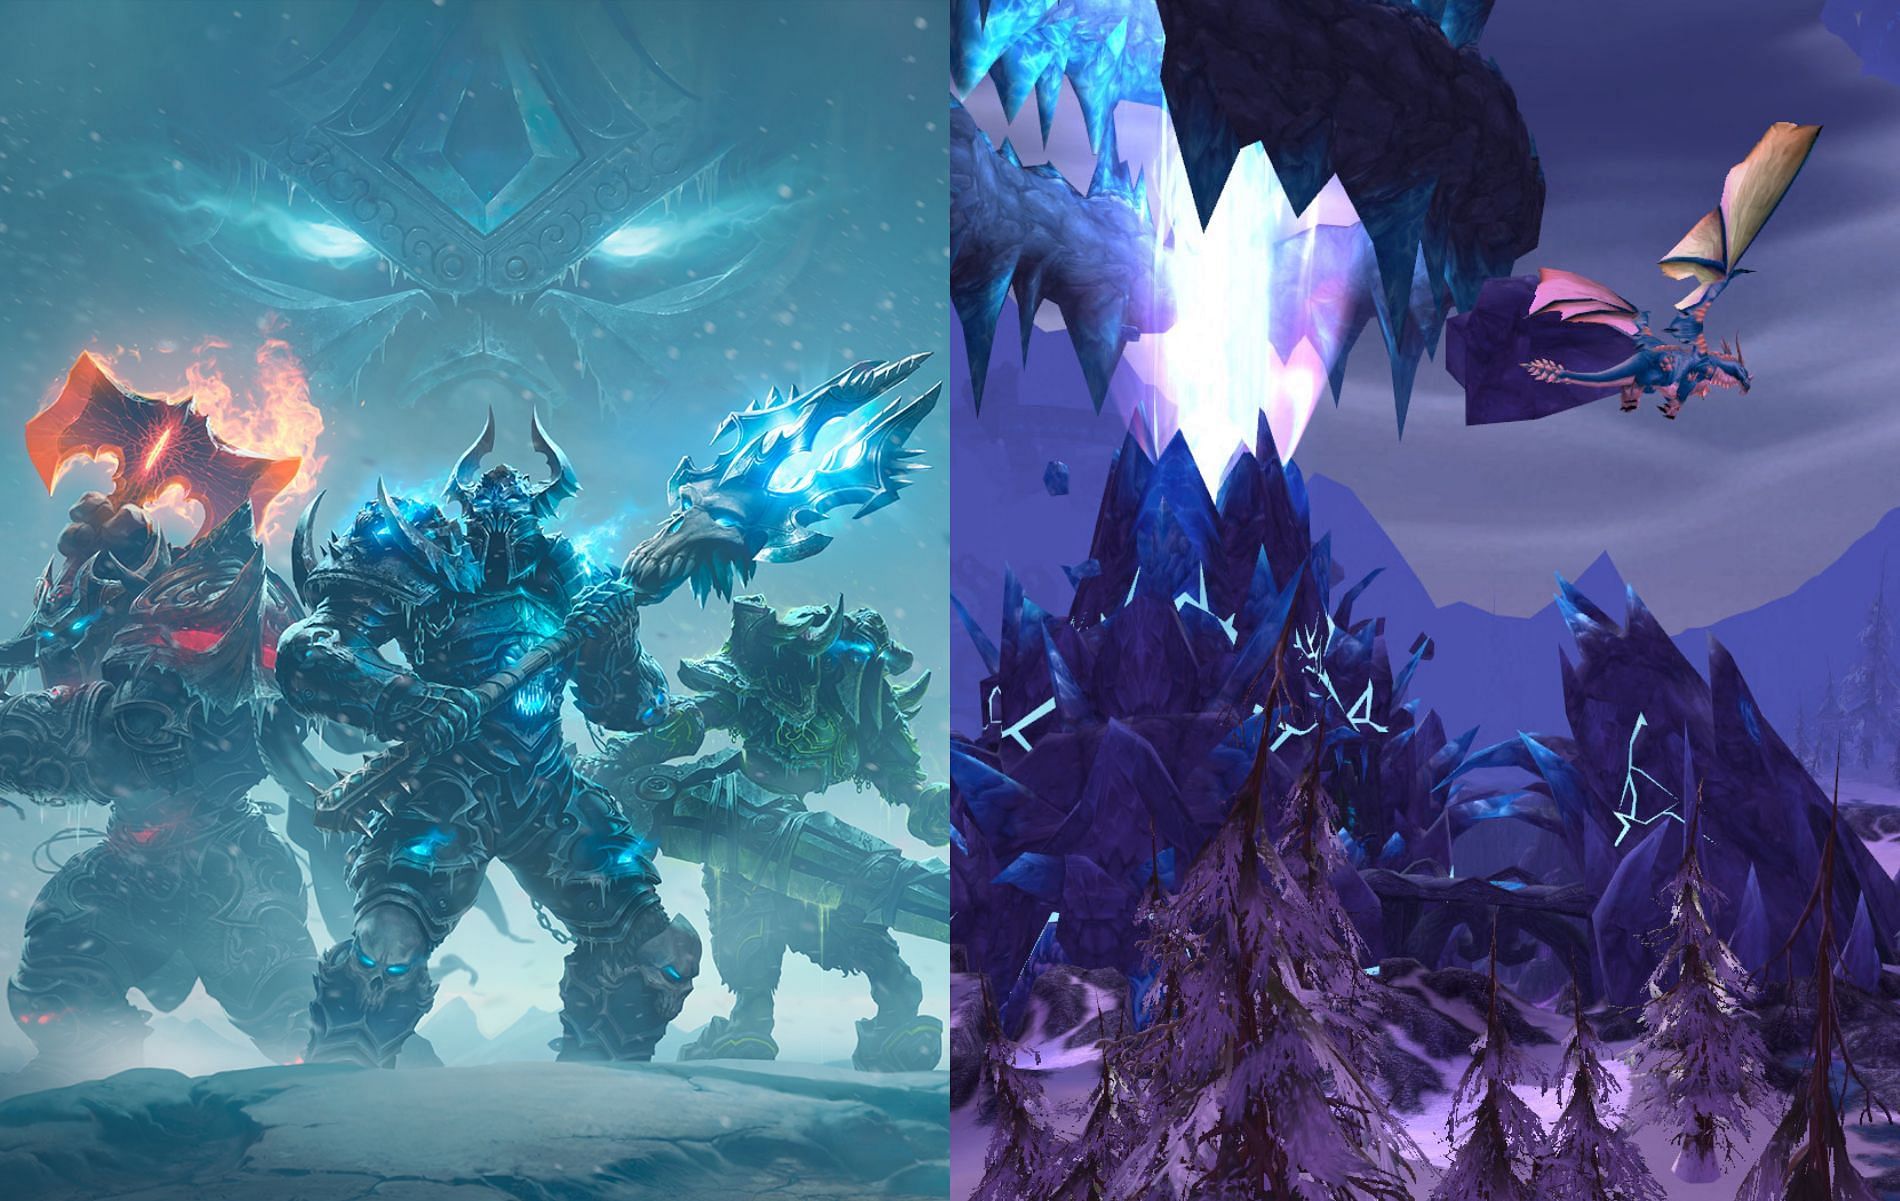 The cold continent beckons adventurers to a land of danger (Images via Blizzard Entertainment)